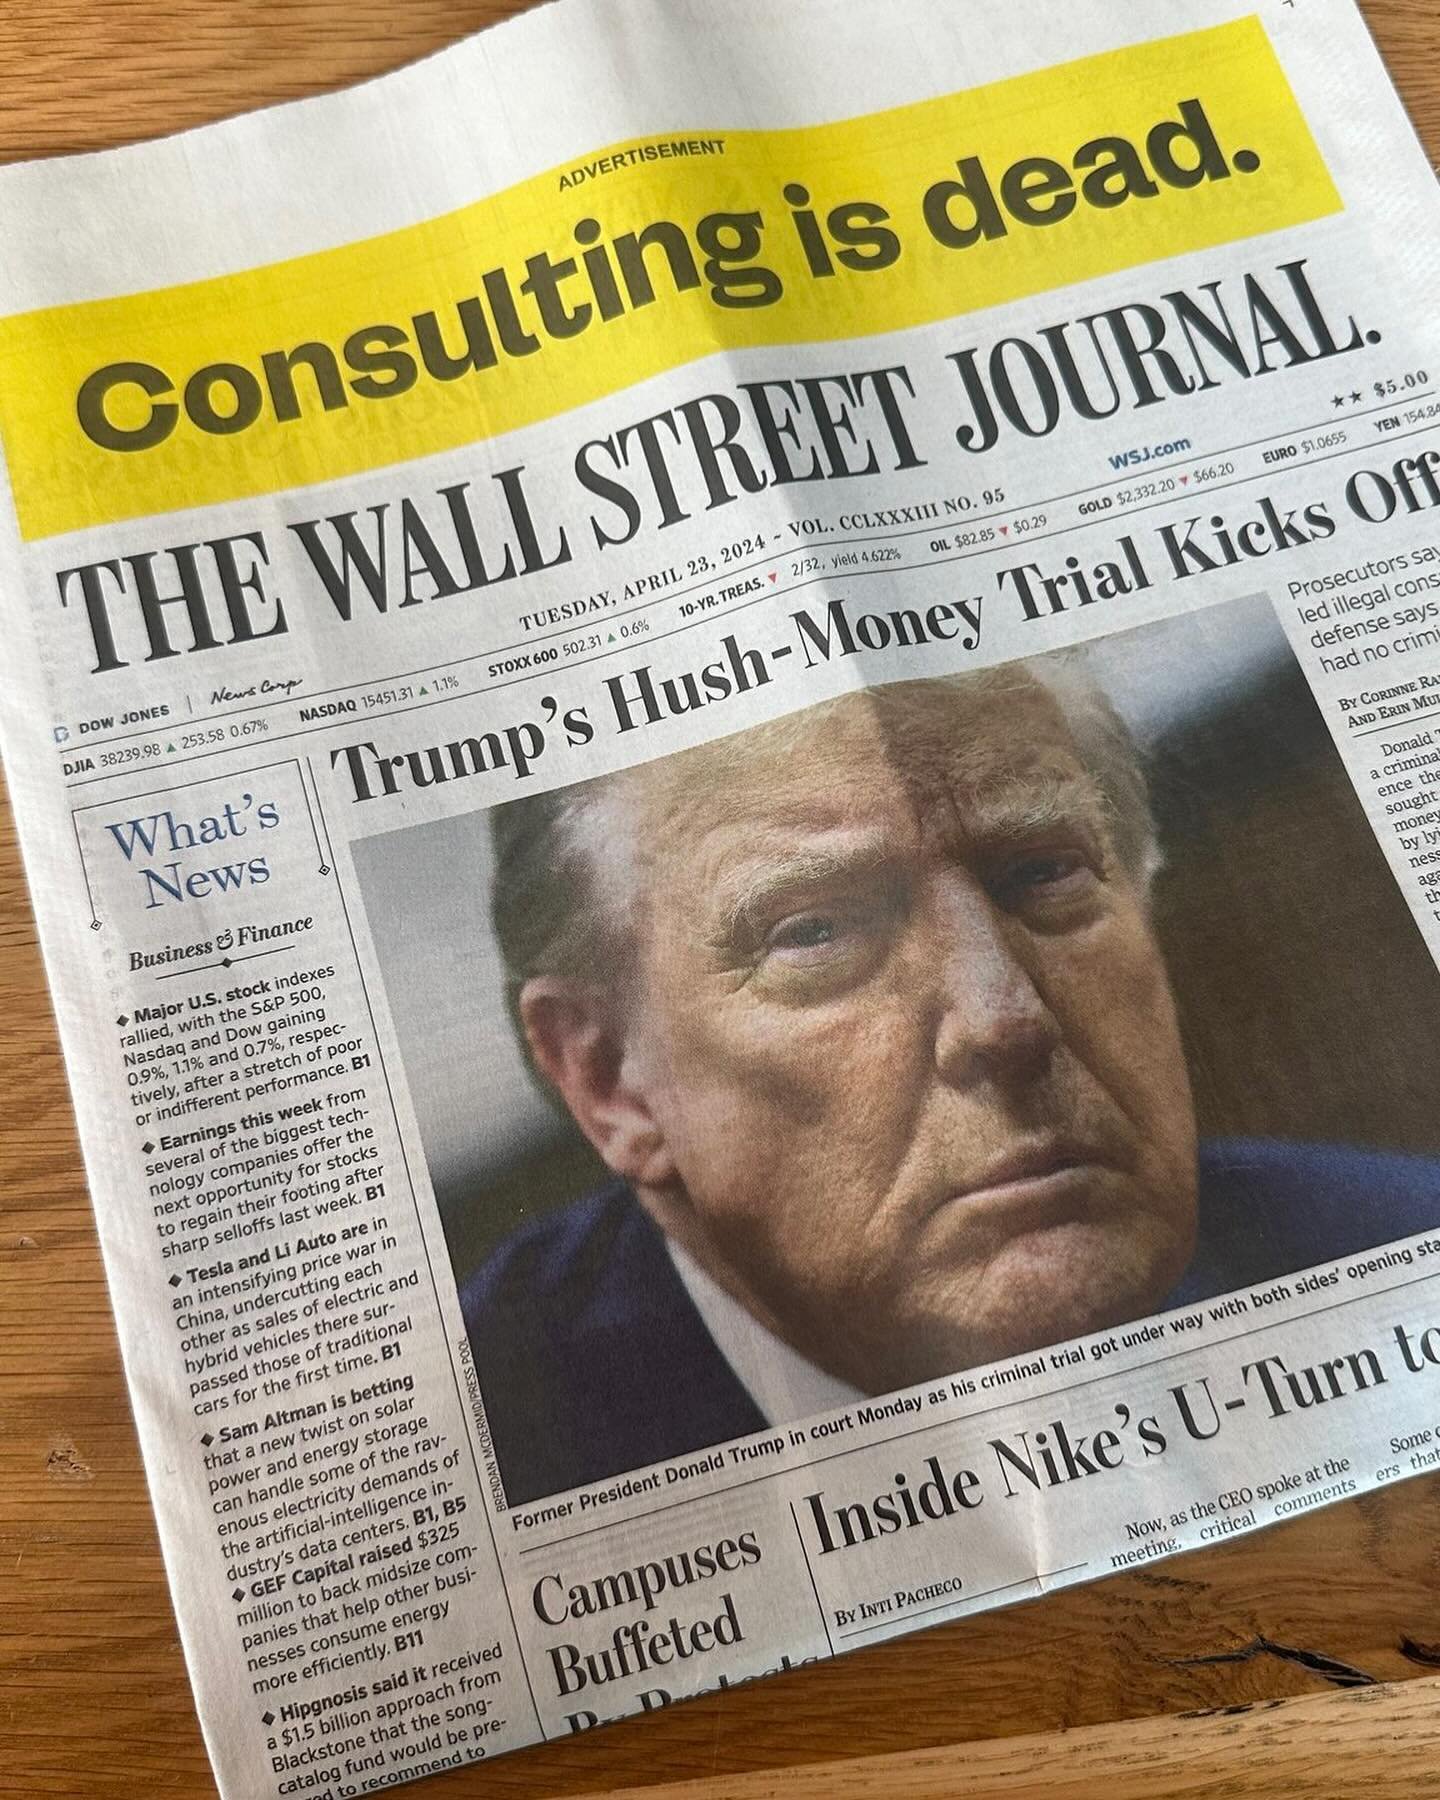 Today, we took out a full page ad in the WSJ, saying Consulting is dead.